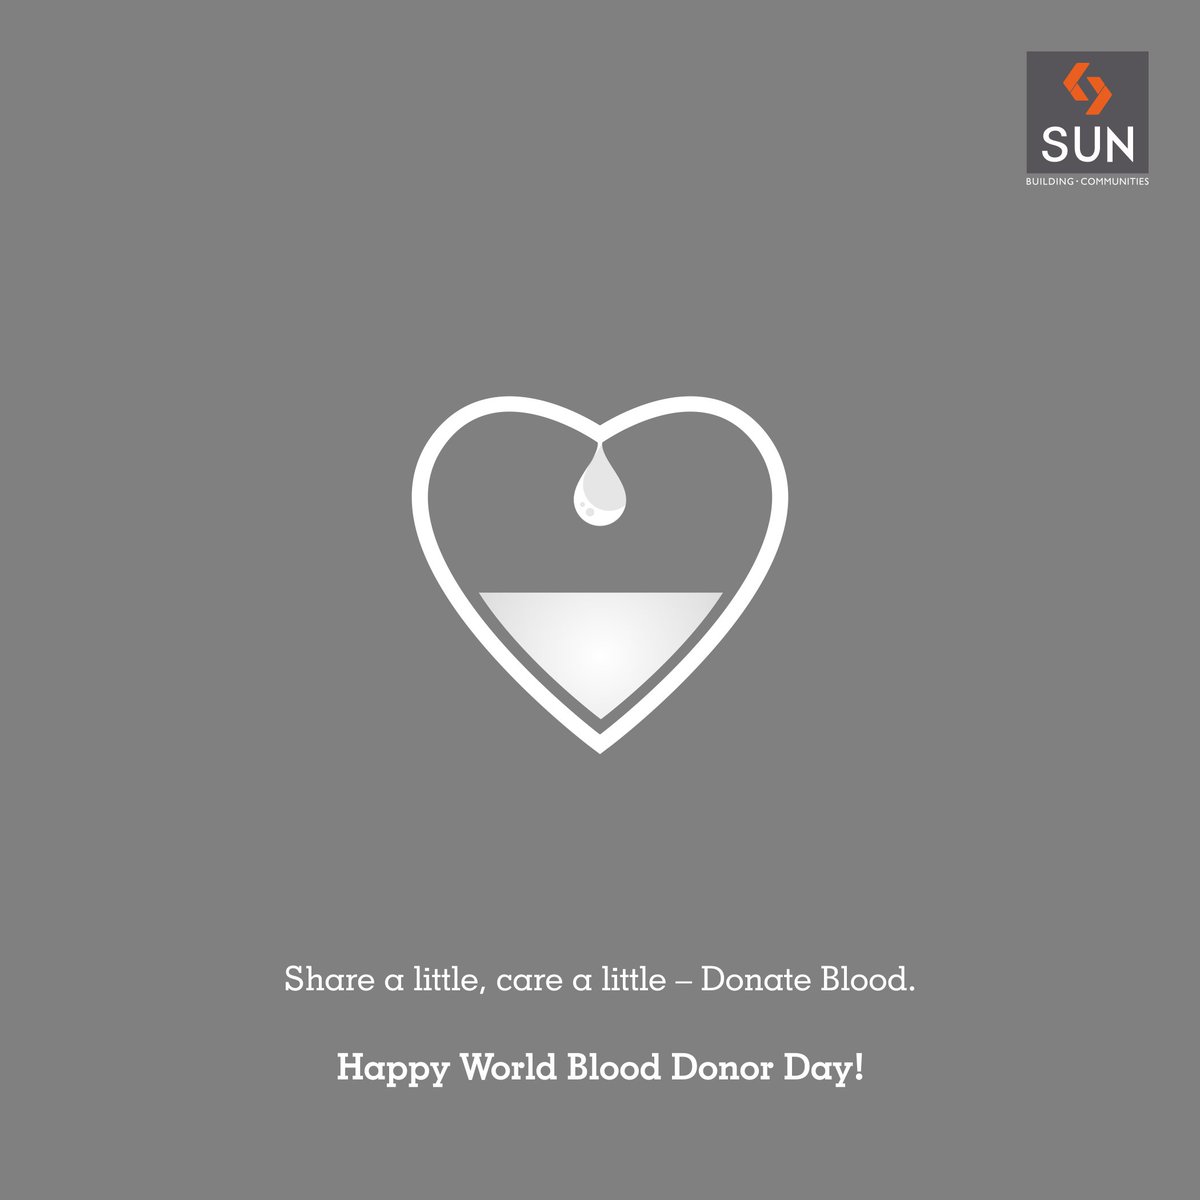 By donating blood once, you save three lives.
Celebrate humanity this #WorldBloodDonorDay.

#DonateBlood https://t.co/fOkG8sV5lK